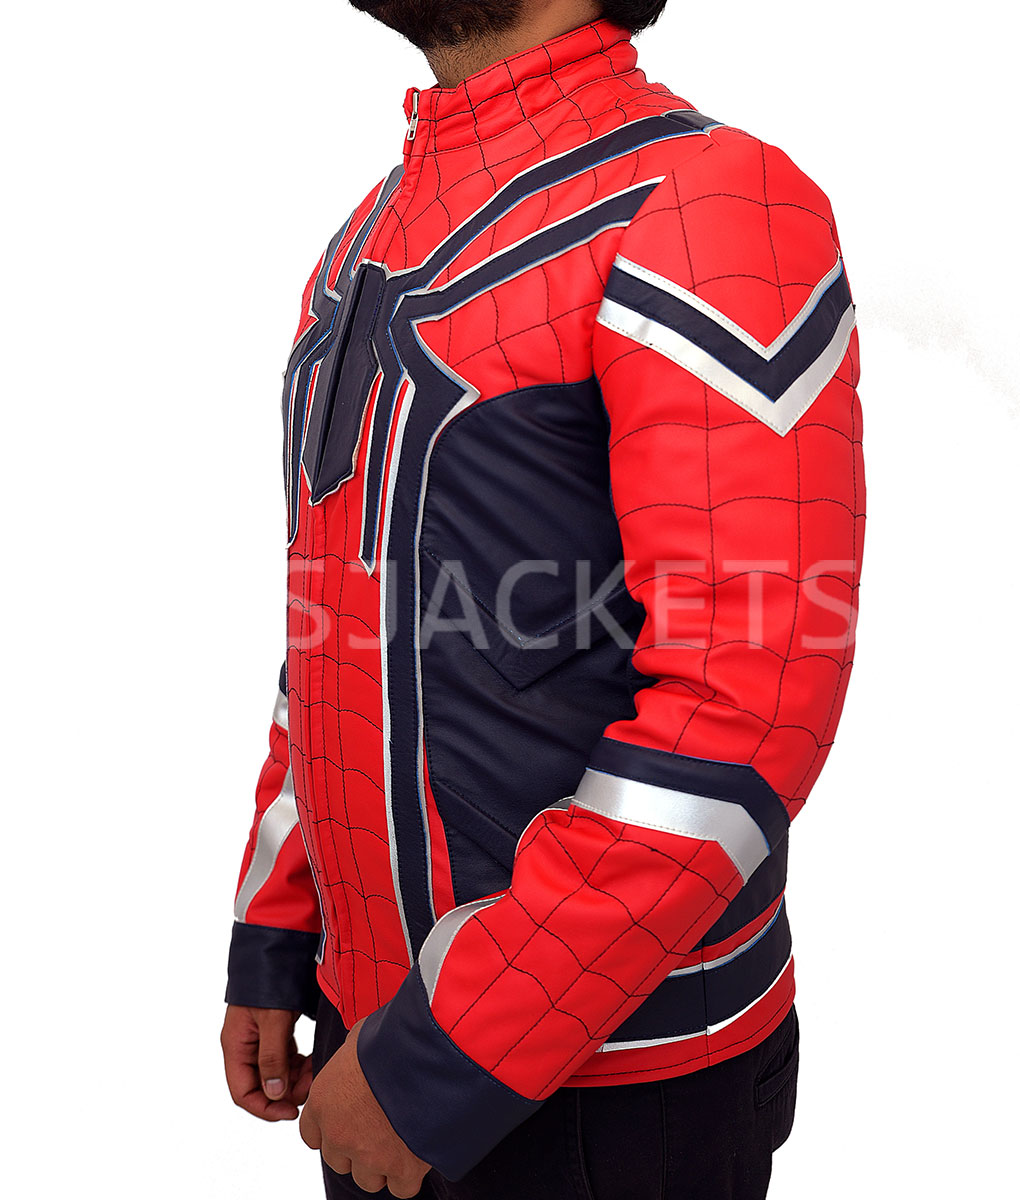 Spiderman Red Leather Jacket (5)